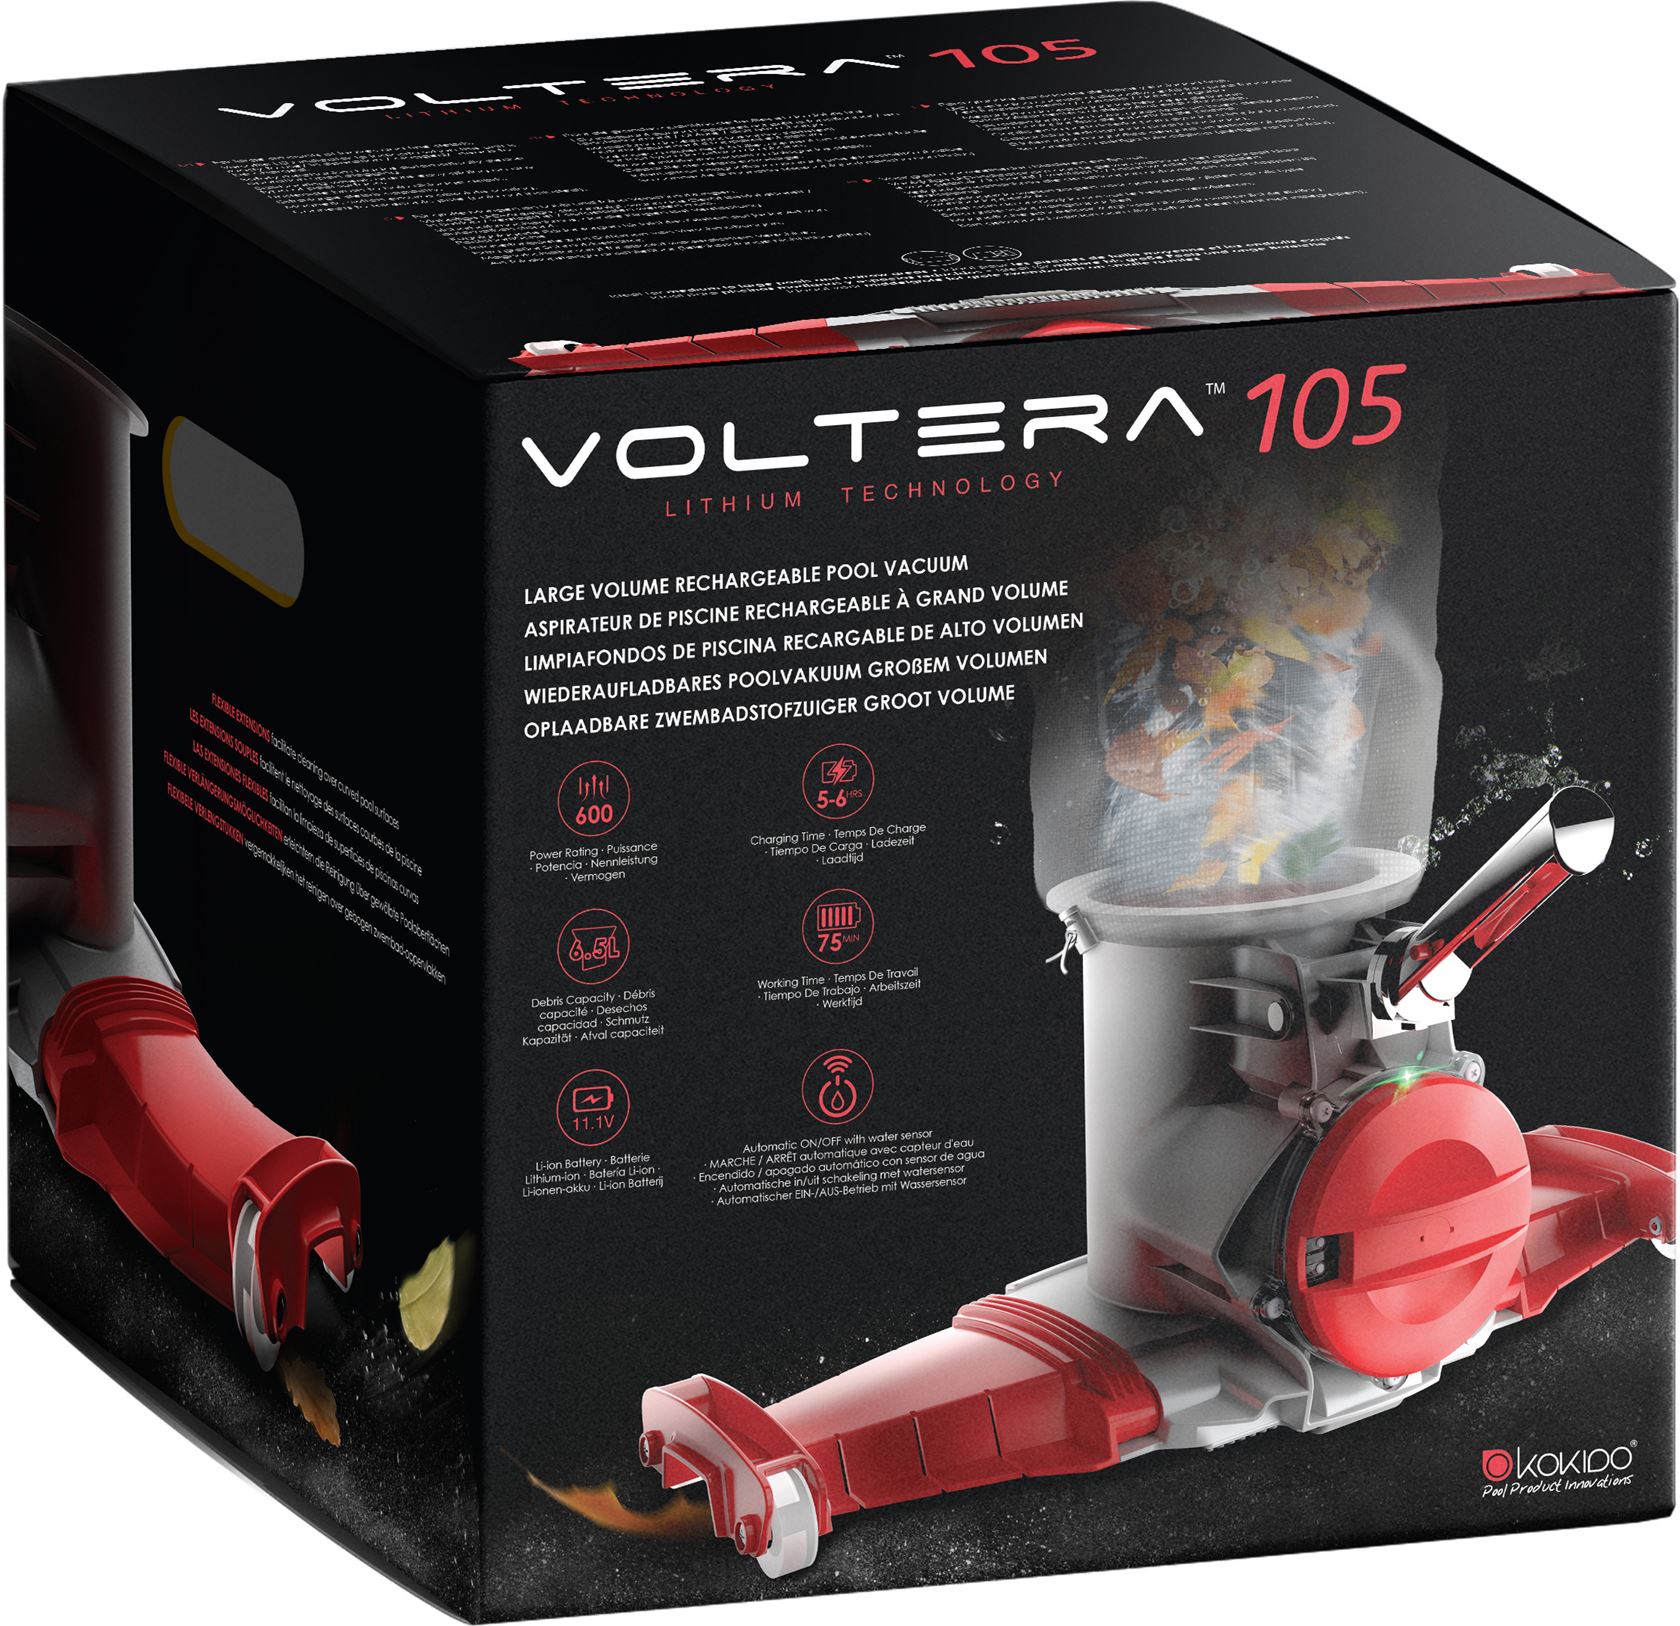 VOLTERA-105-Heavy-duty-Rechargeable-Pool-Vacuum